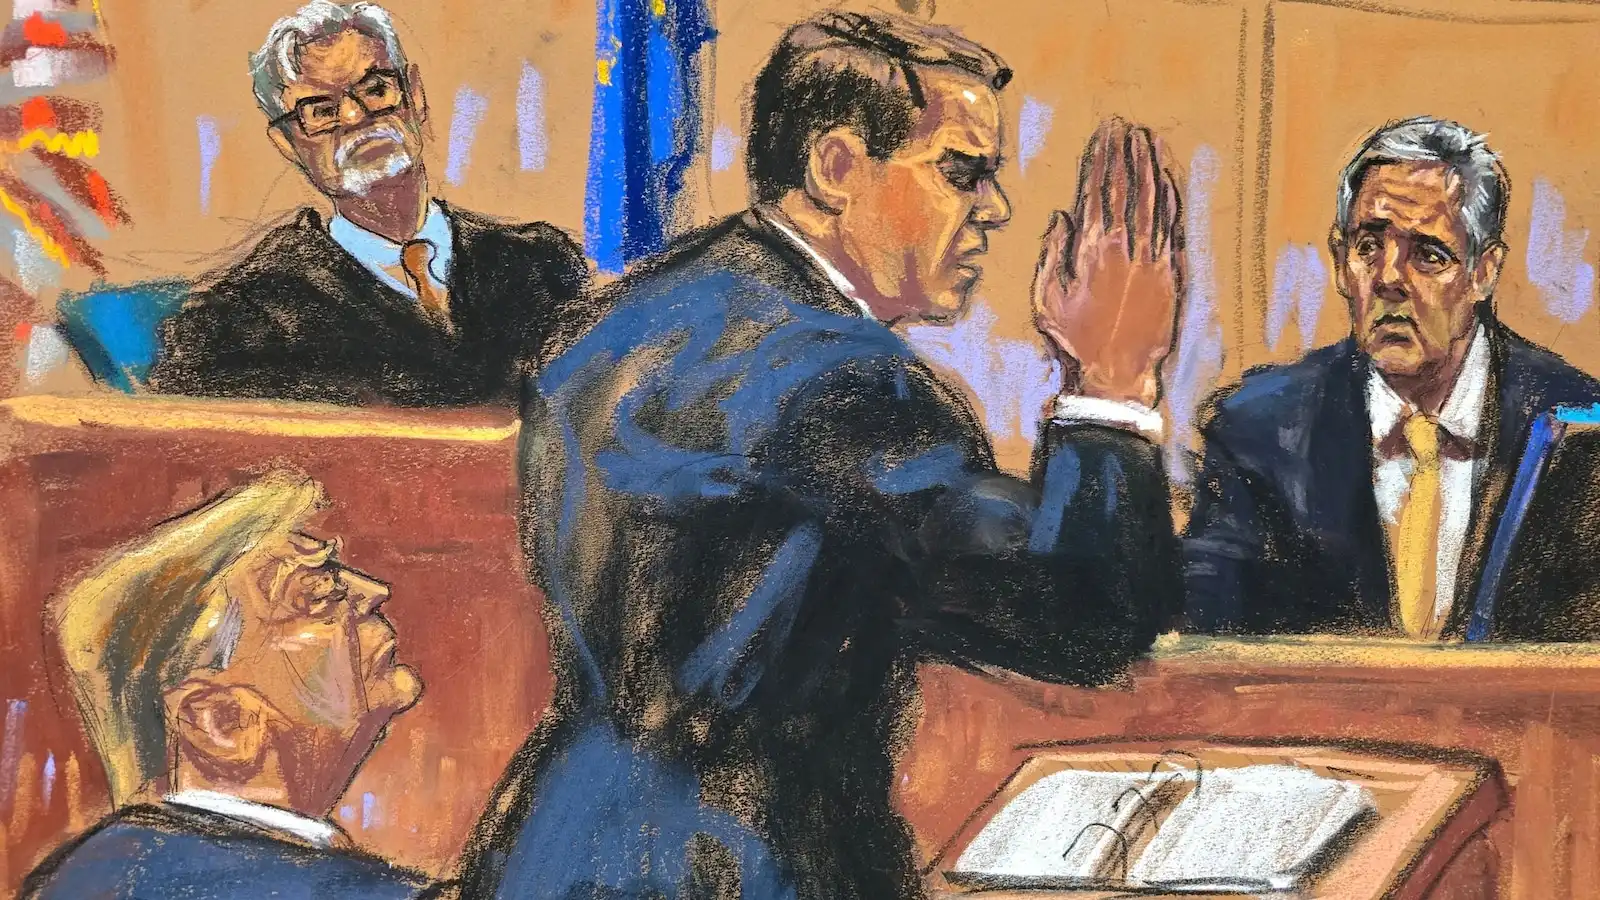 Trump hush money trial: Defense accuses Michael Cohen of lying in fiery turn